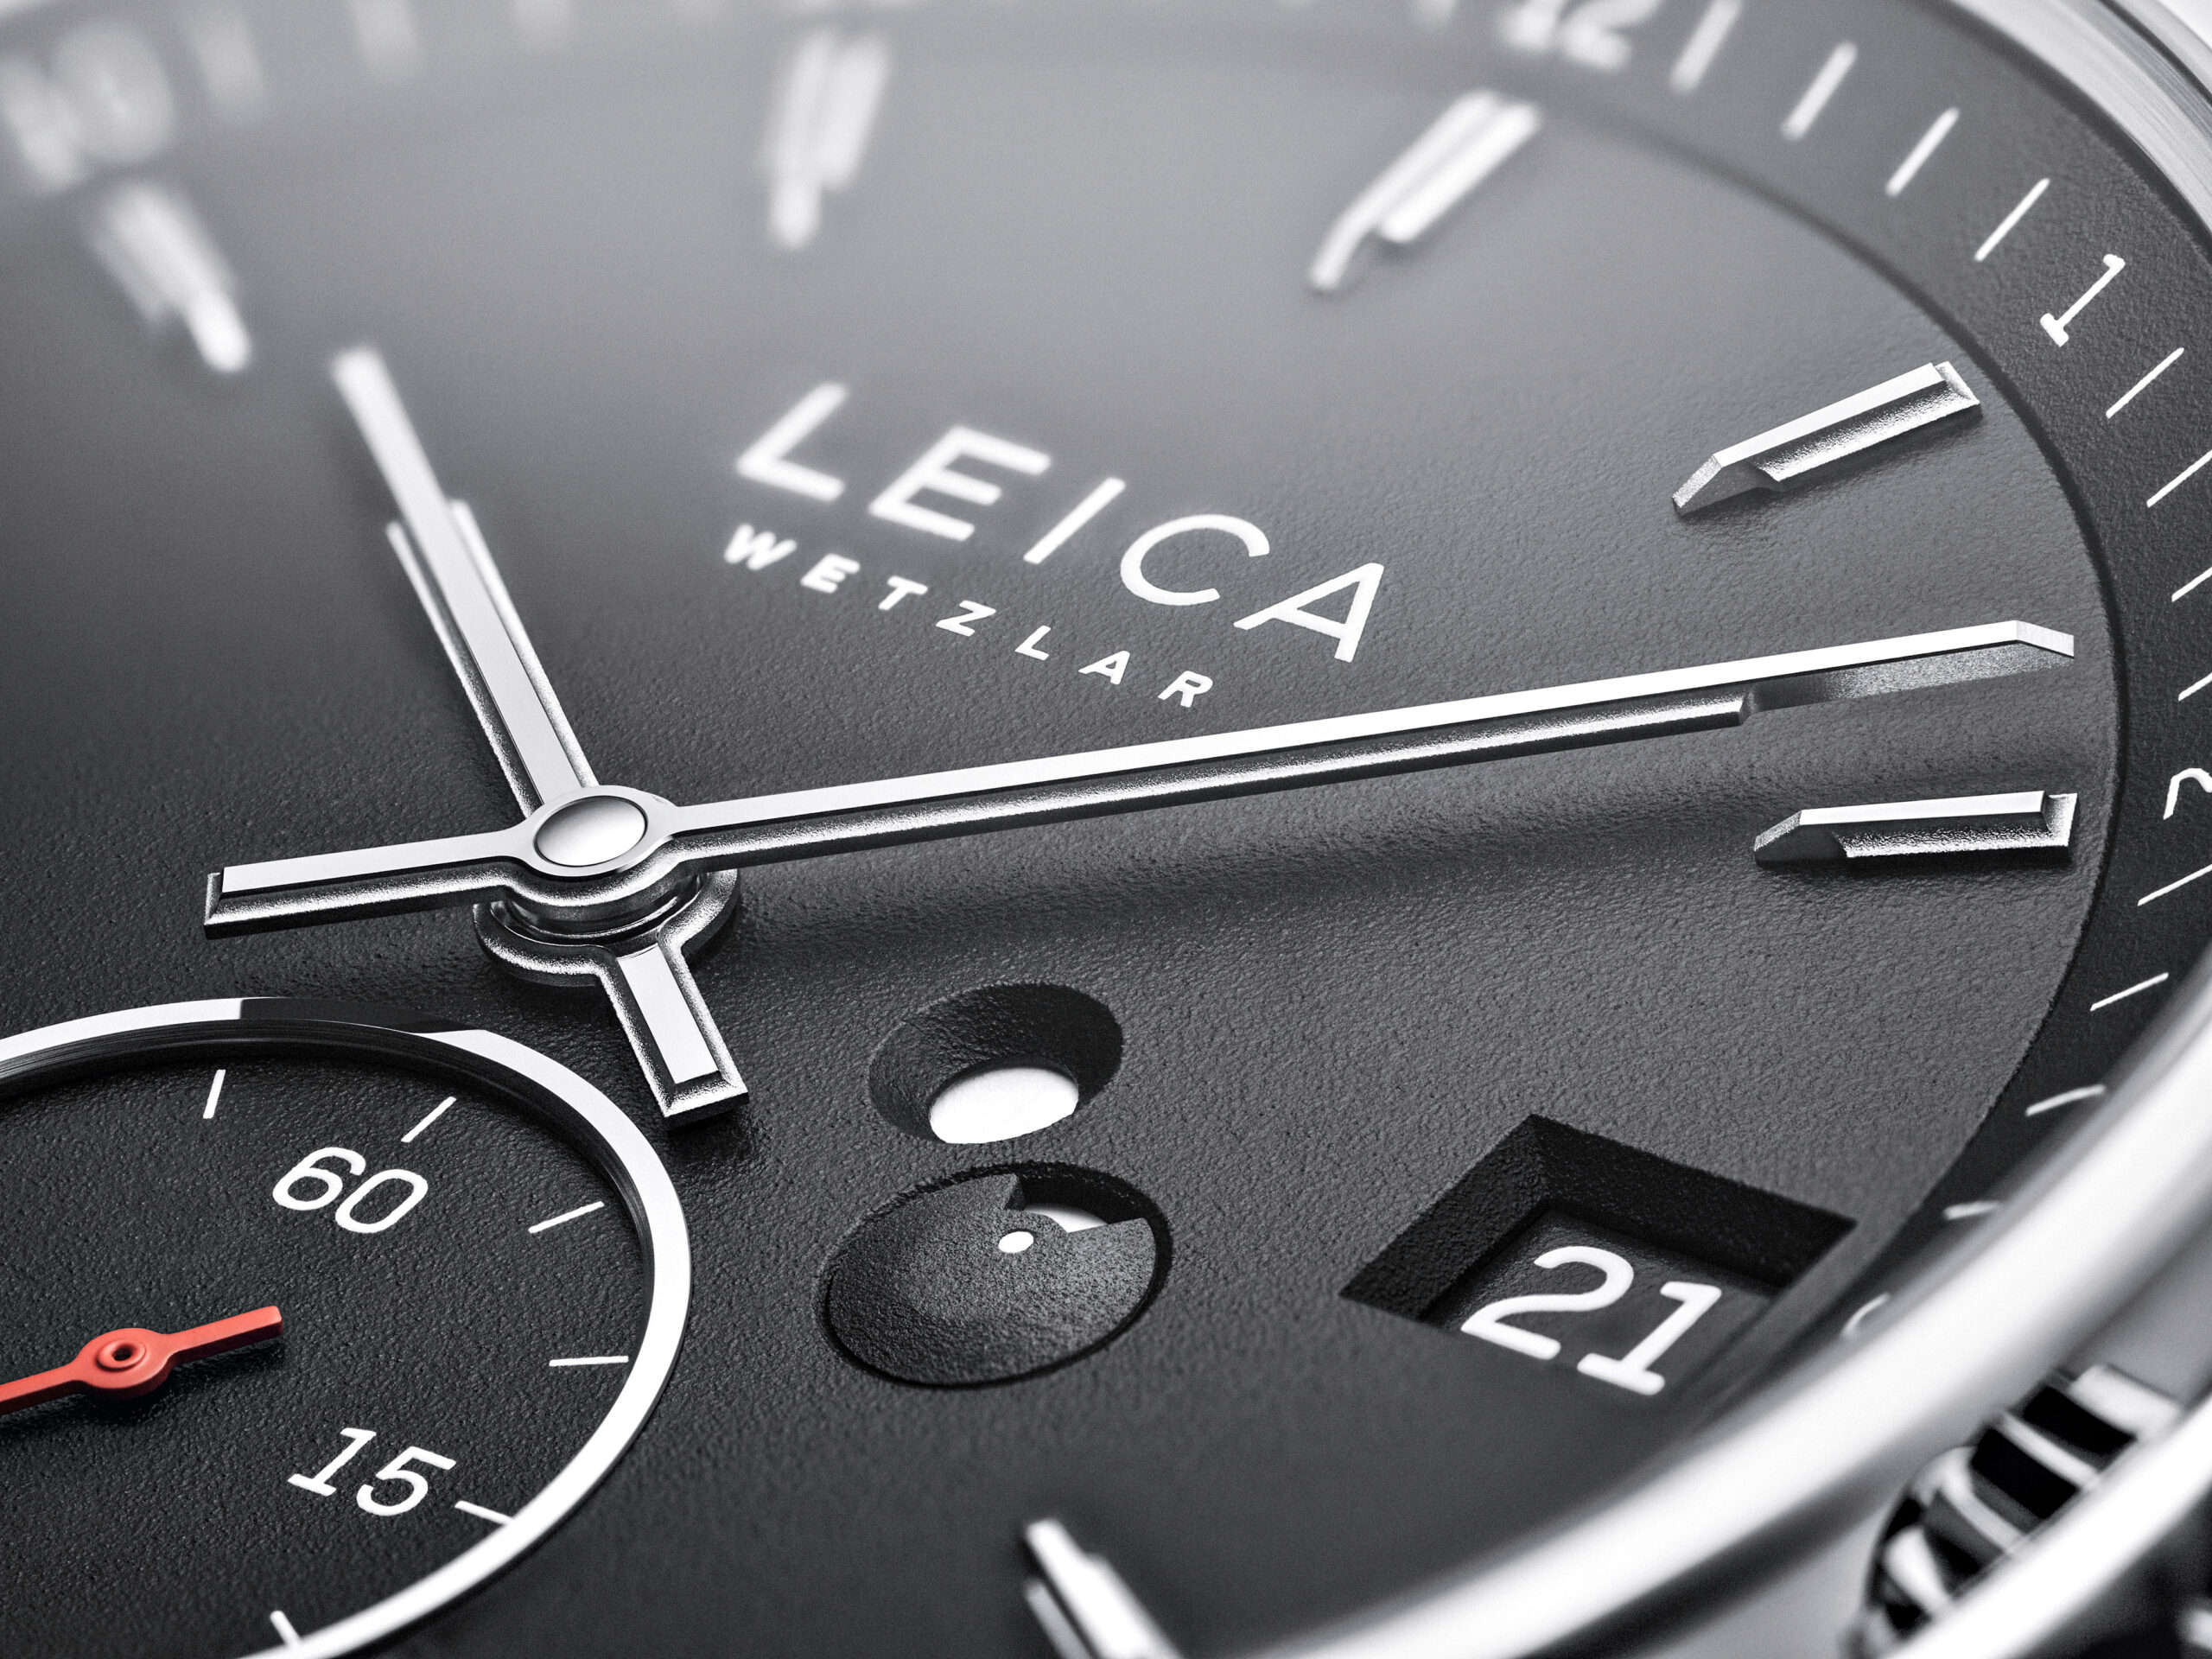 Leica Watch Close up front CMYK scaled